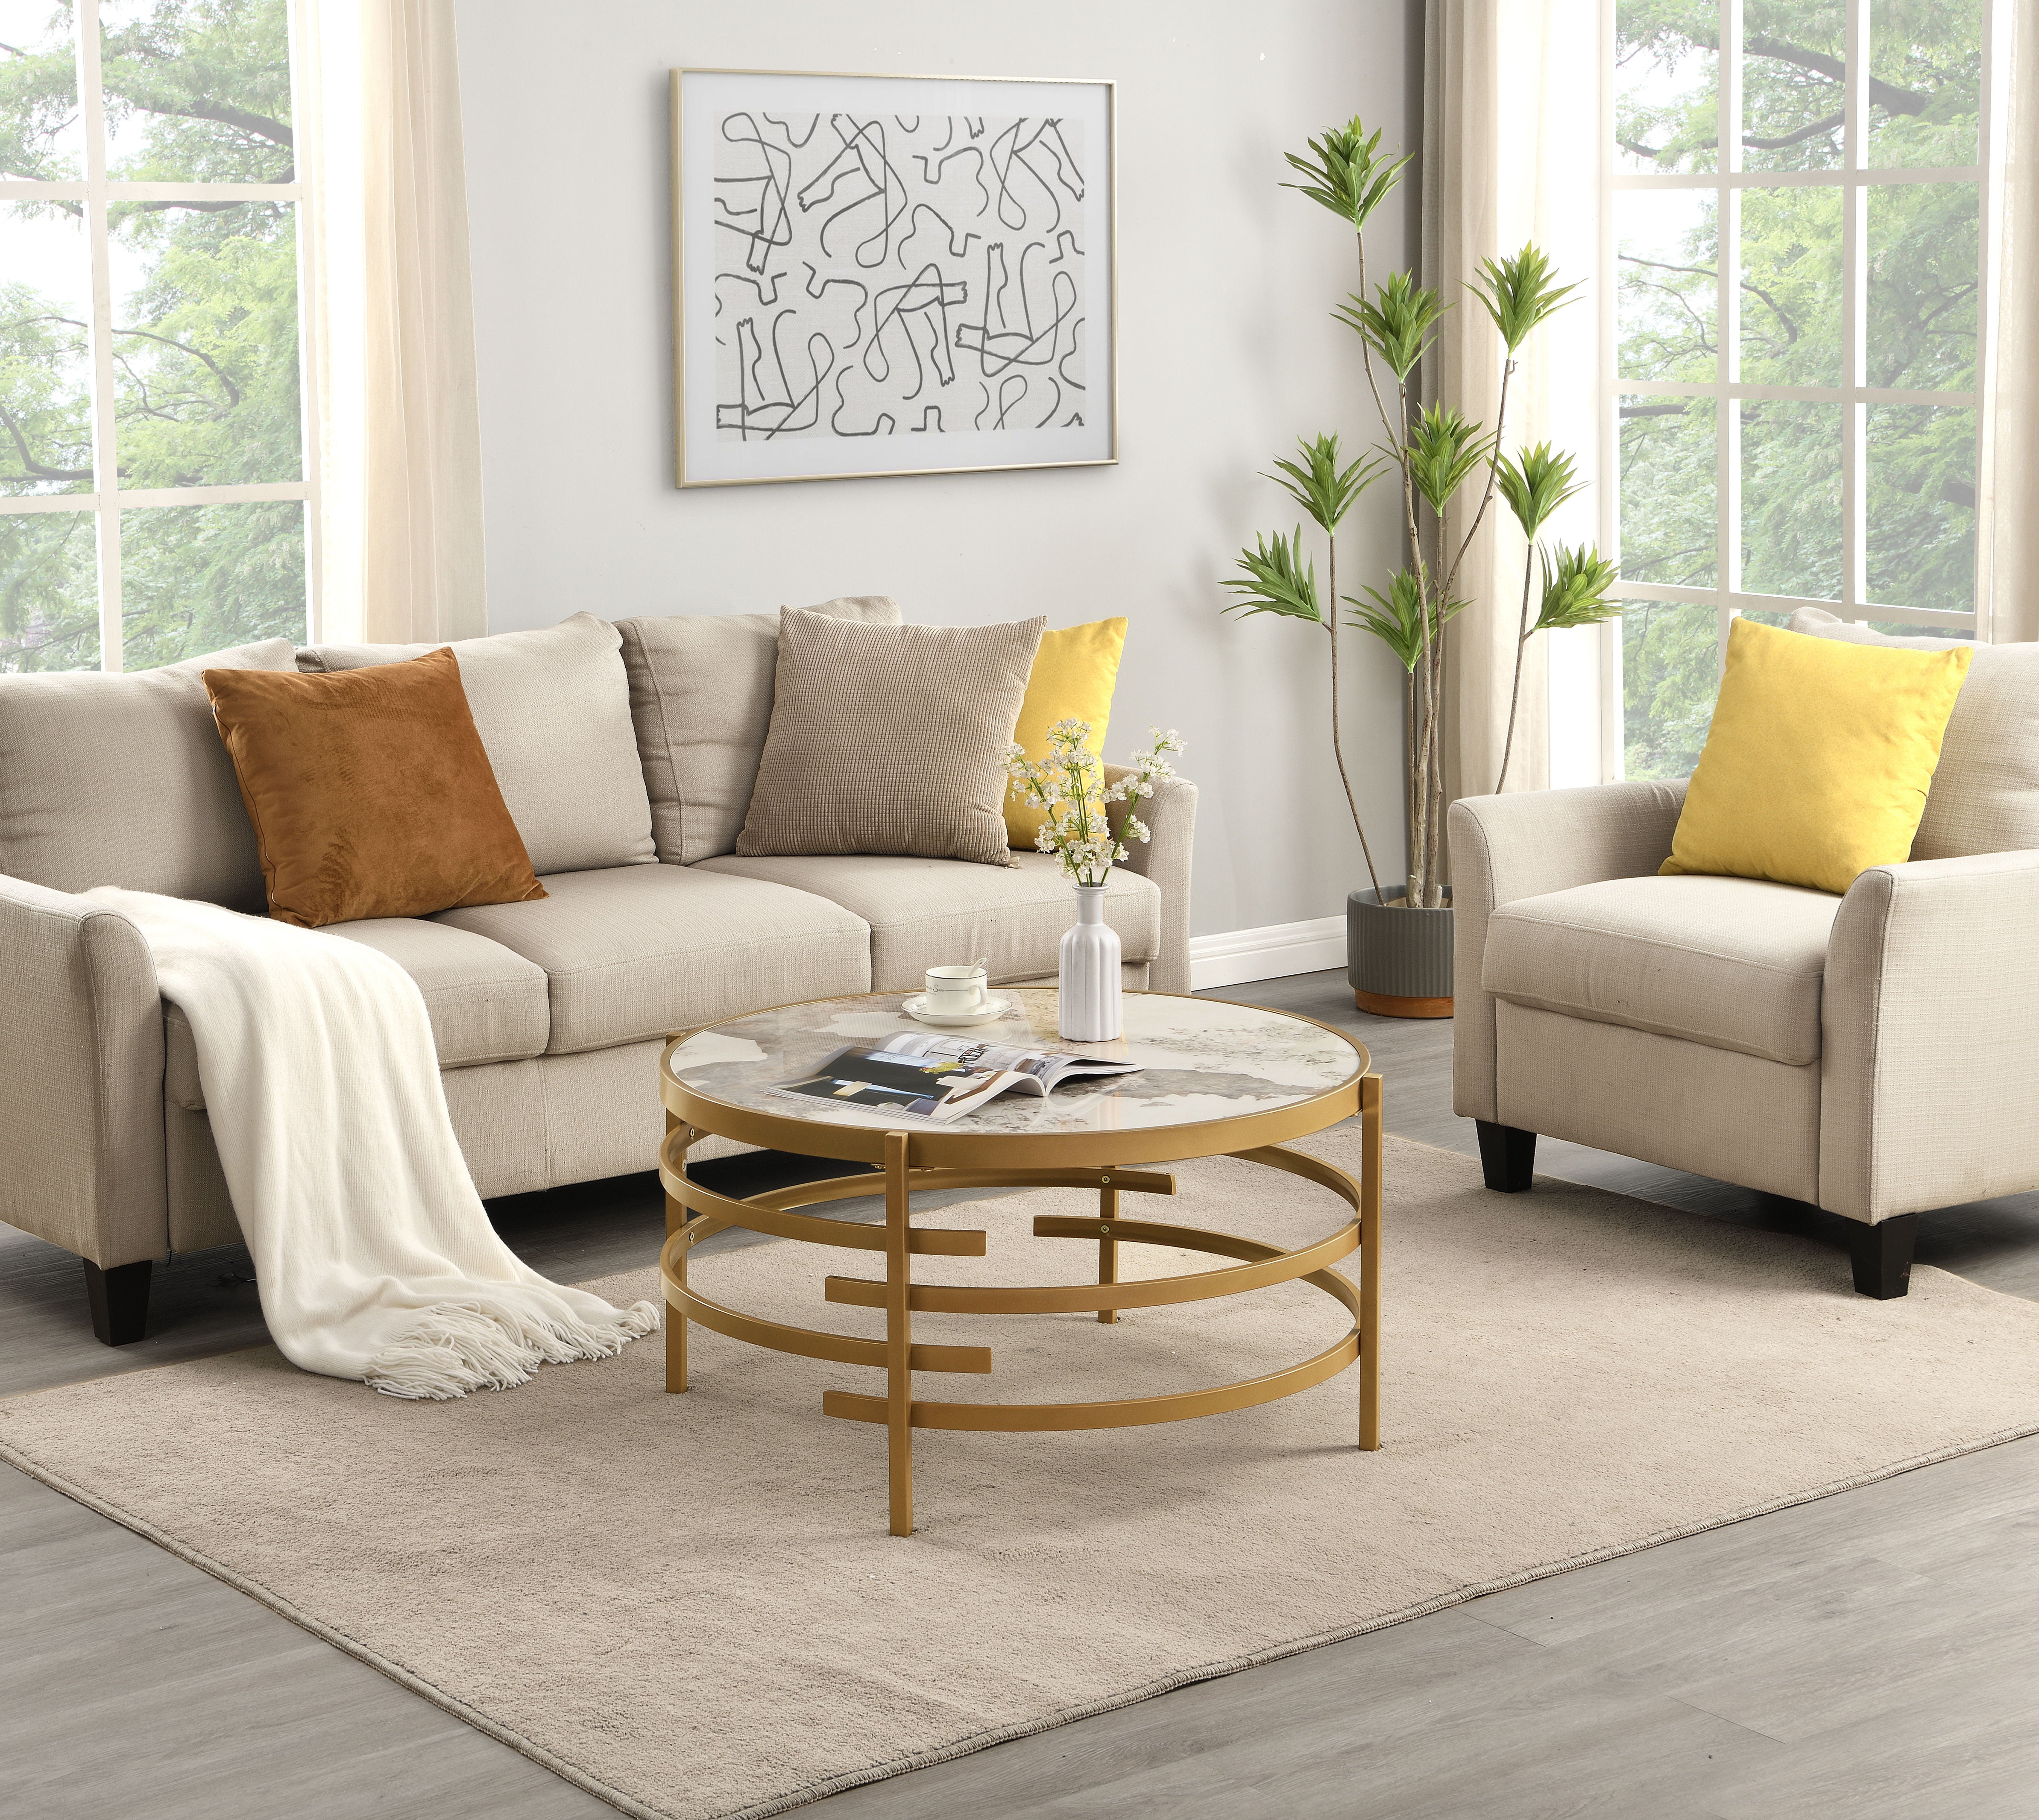 Round Coffee Table With Sintered Stone Top&Sturdy Metal Frame, Modern Coffee Table For Living Room, Golden